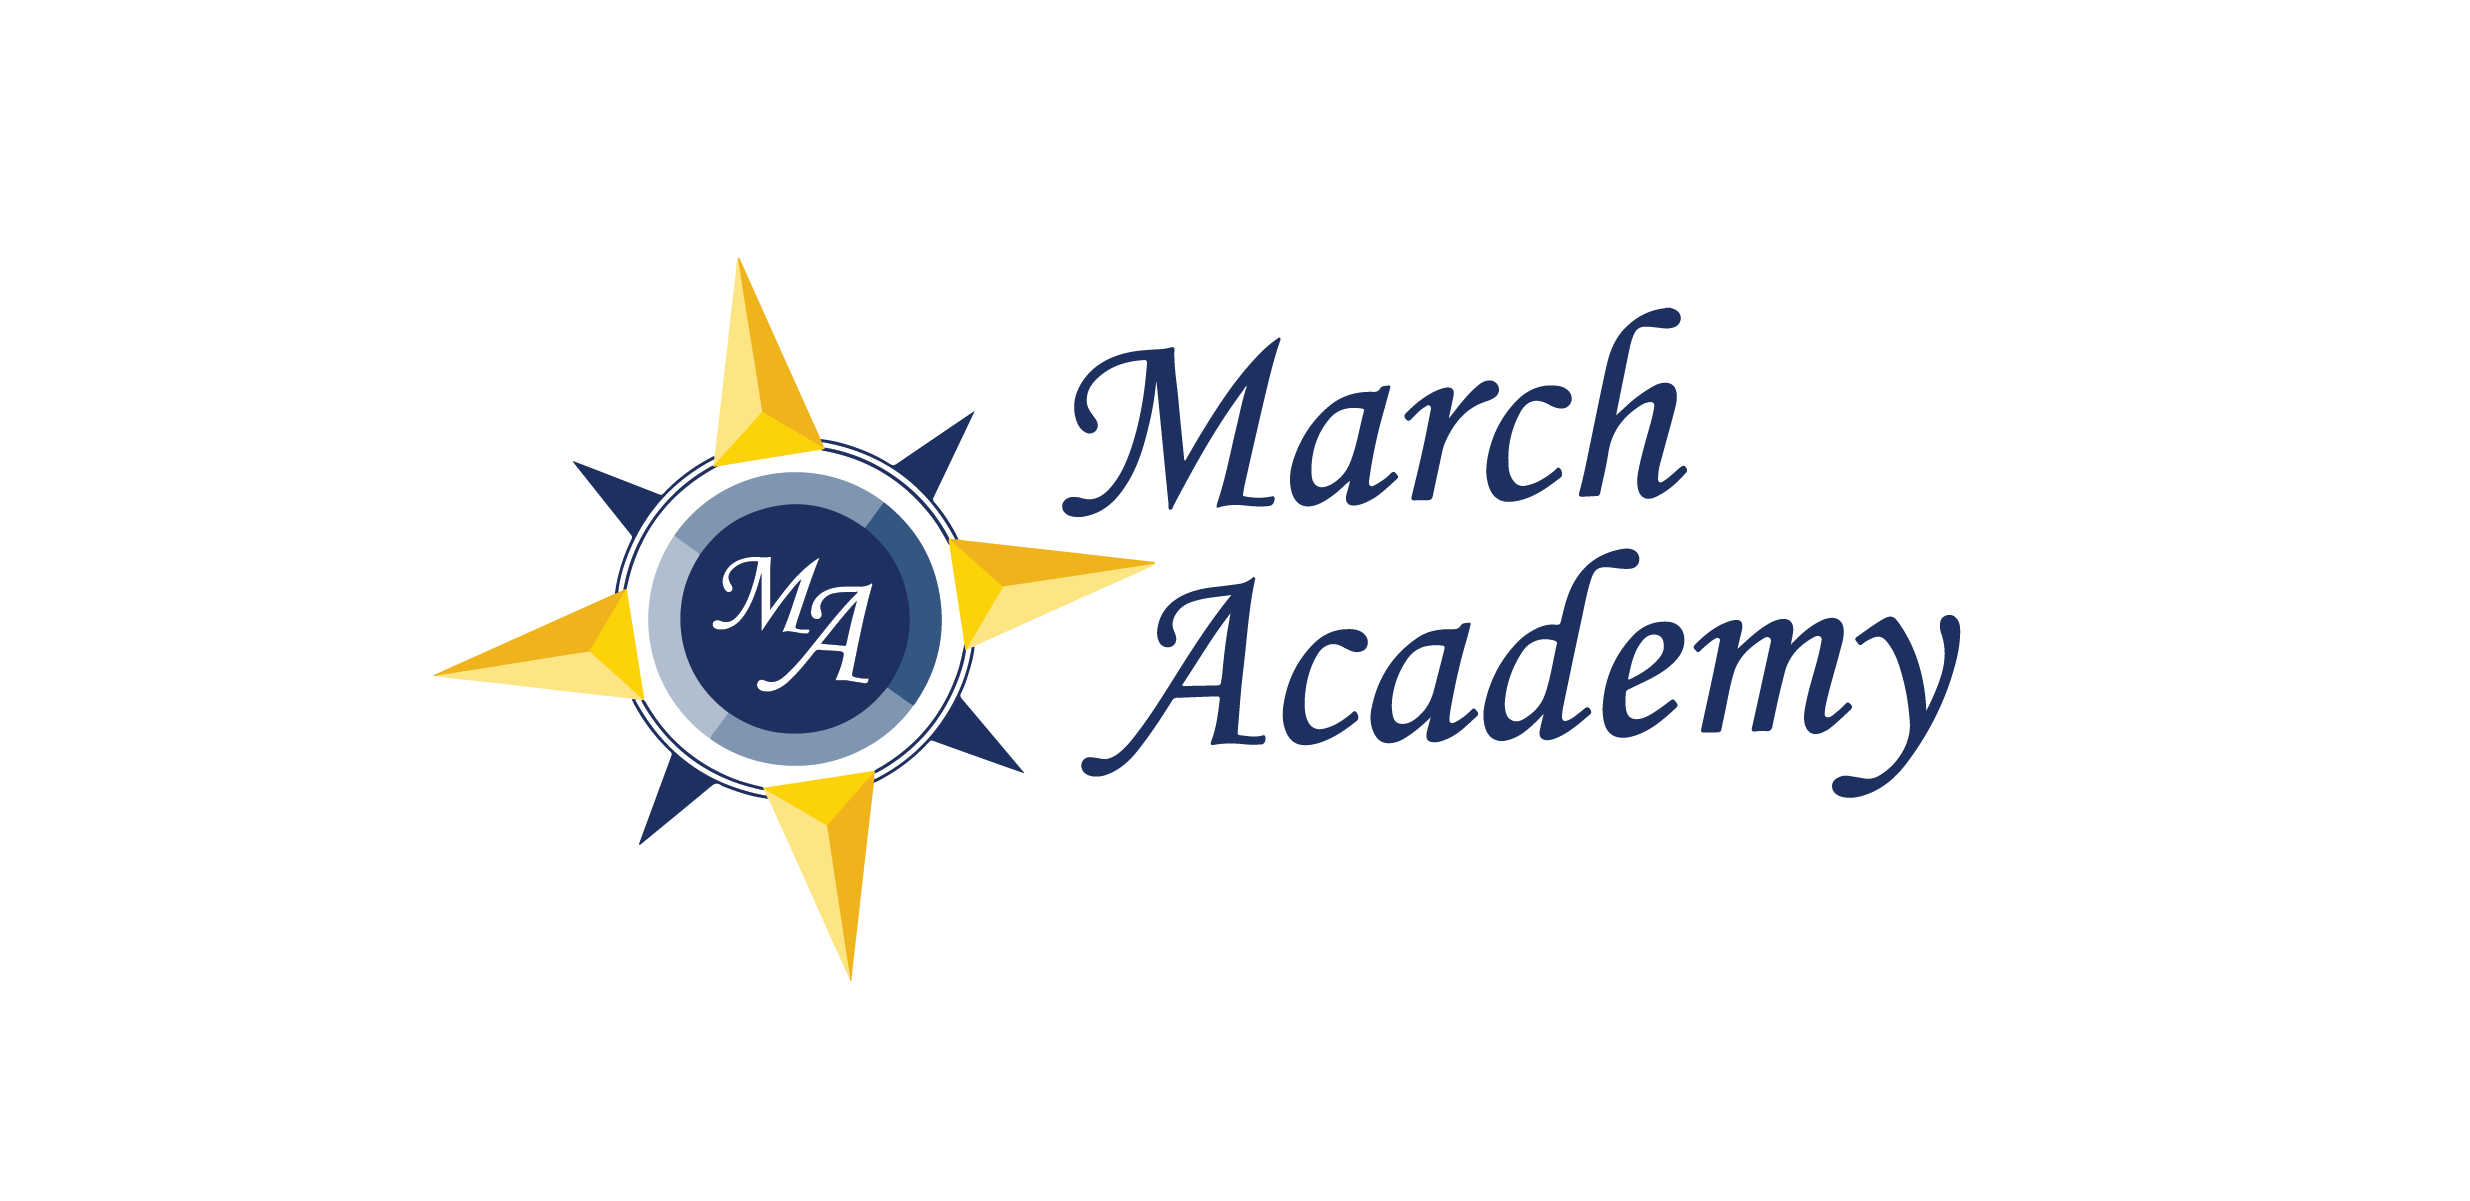 March Academy